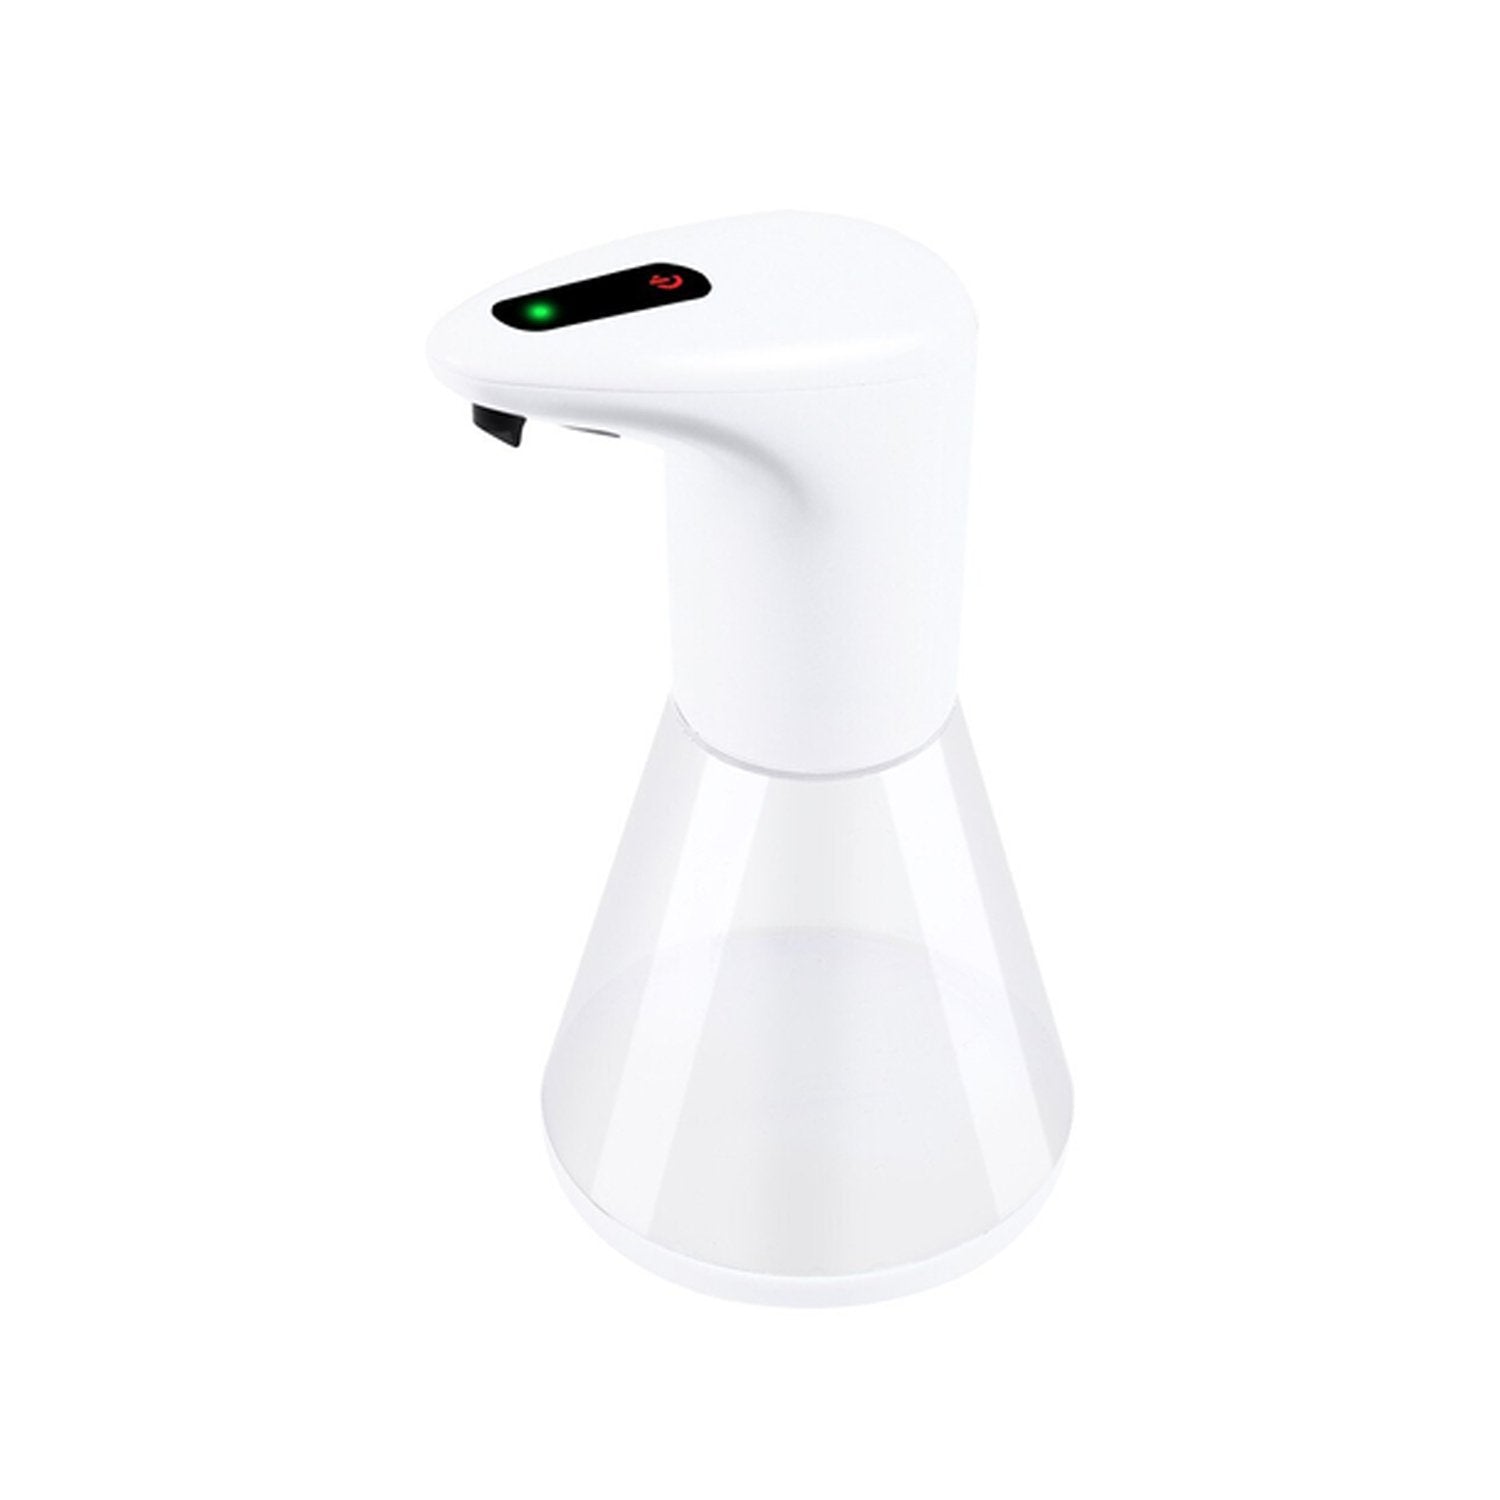 6024A Automatic Hands-Free Touch less Soap Dispenser with Auto Sensor (480ML)